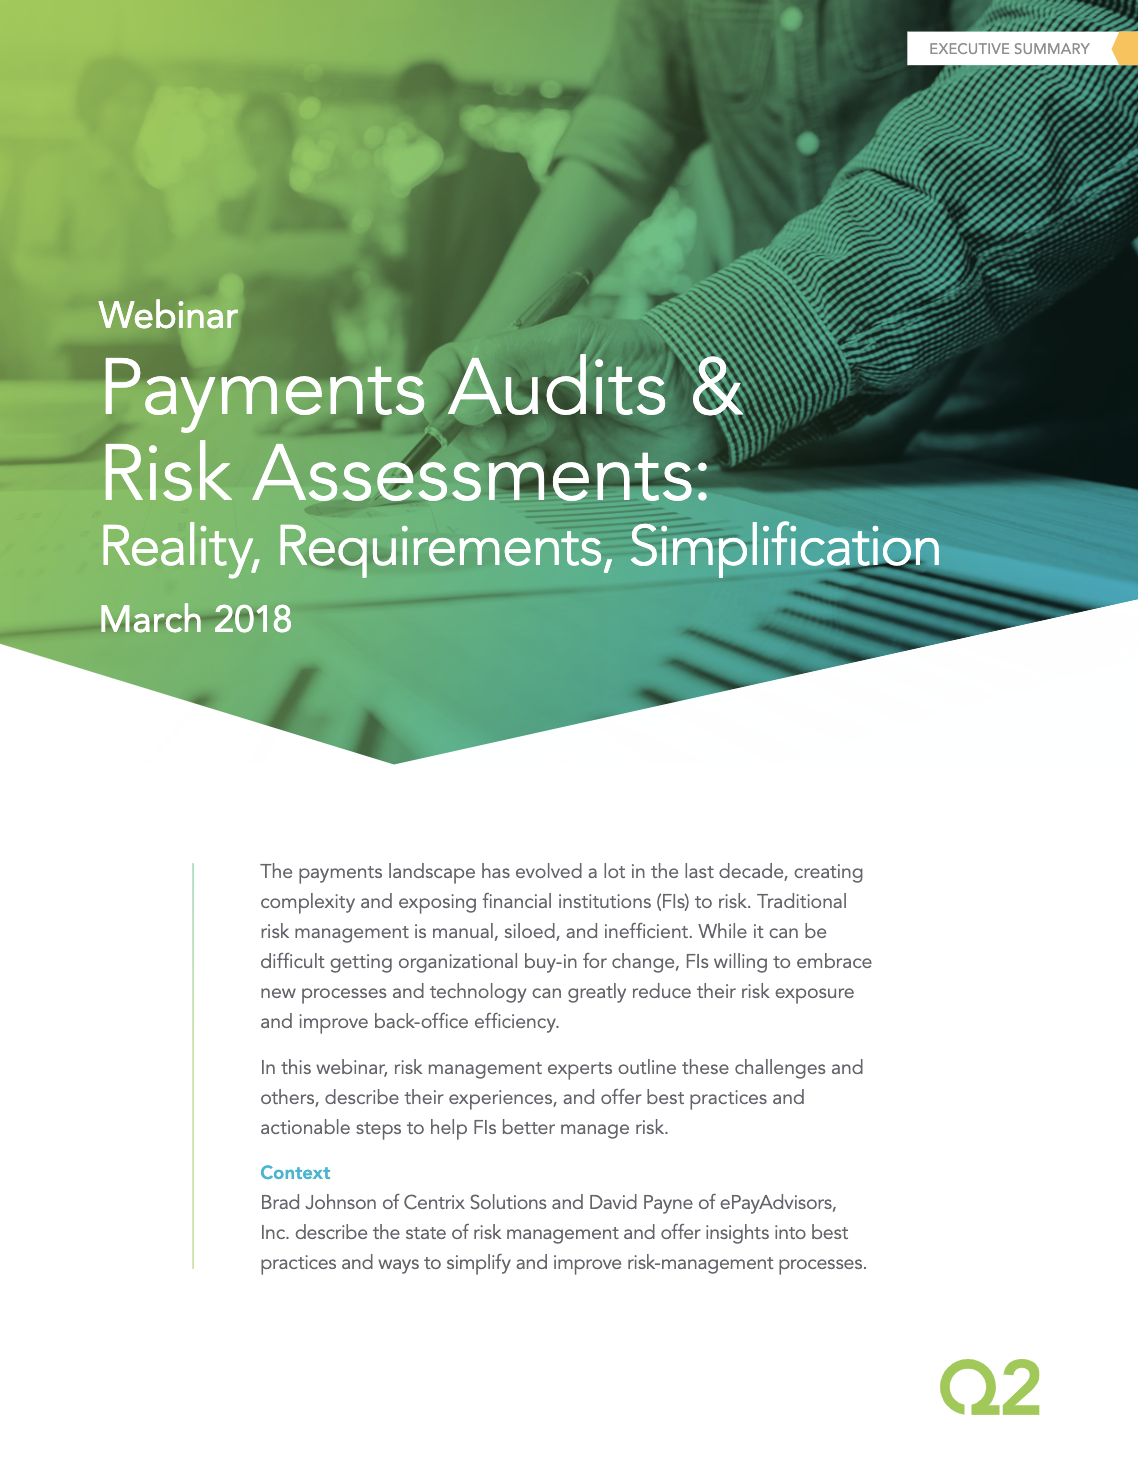 Payments Audits & Risk Assessments Executive Summary